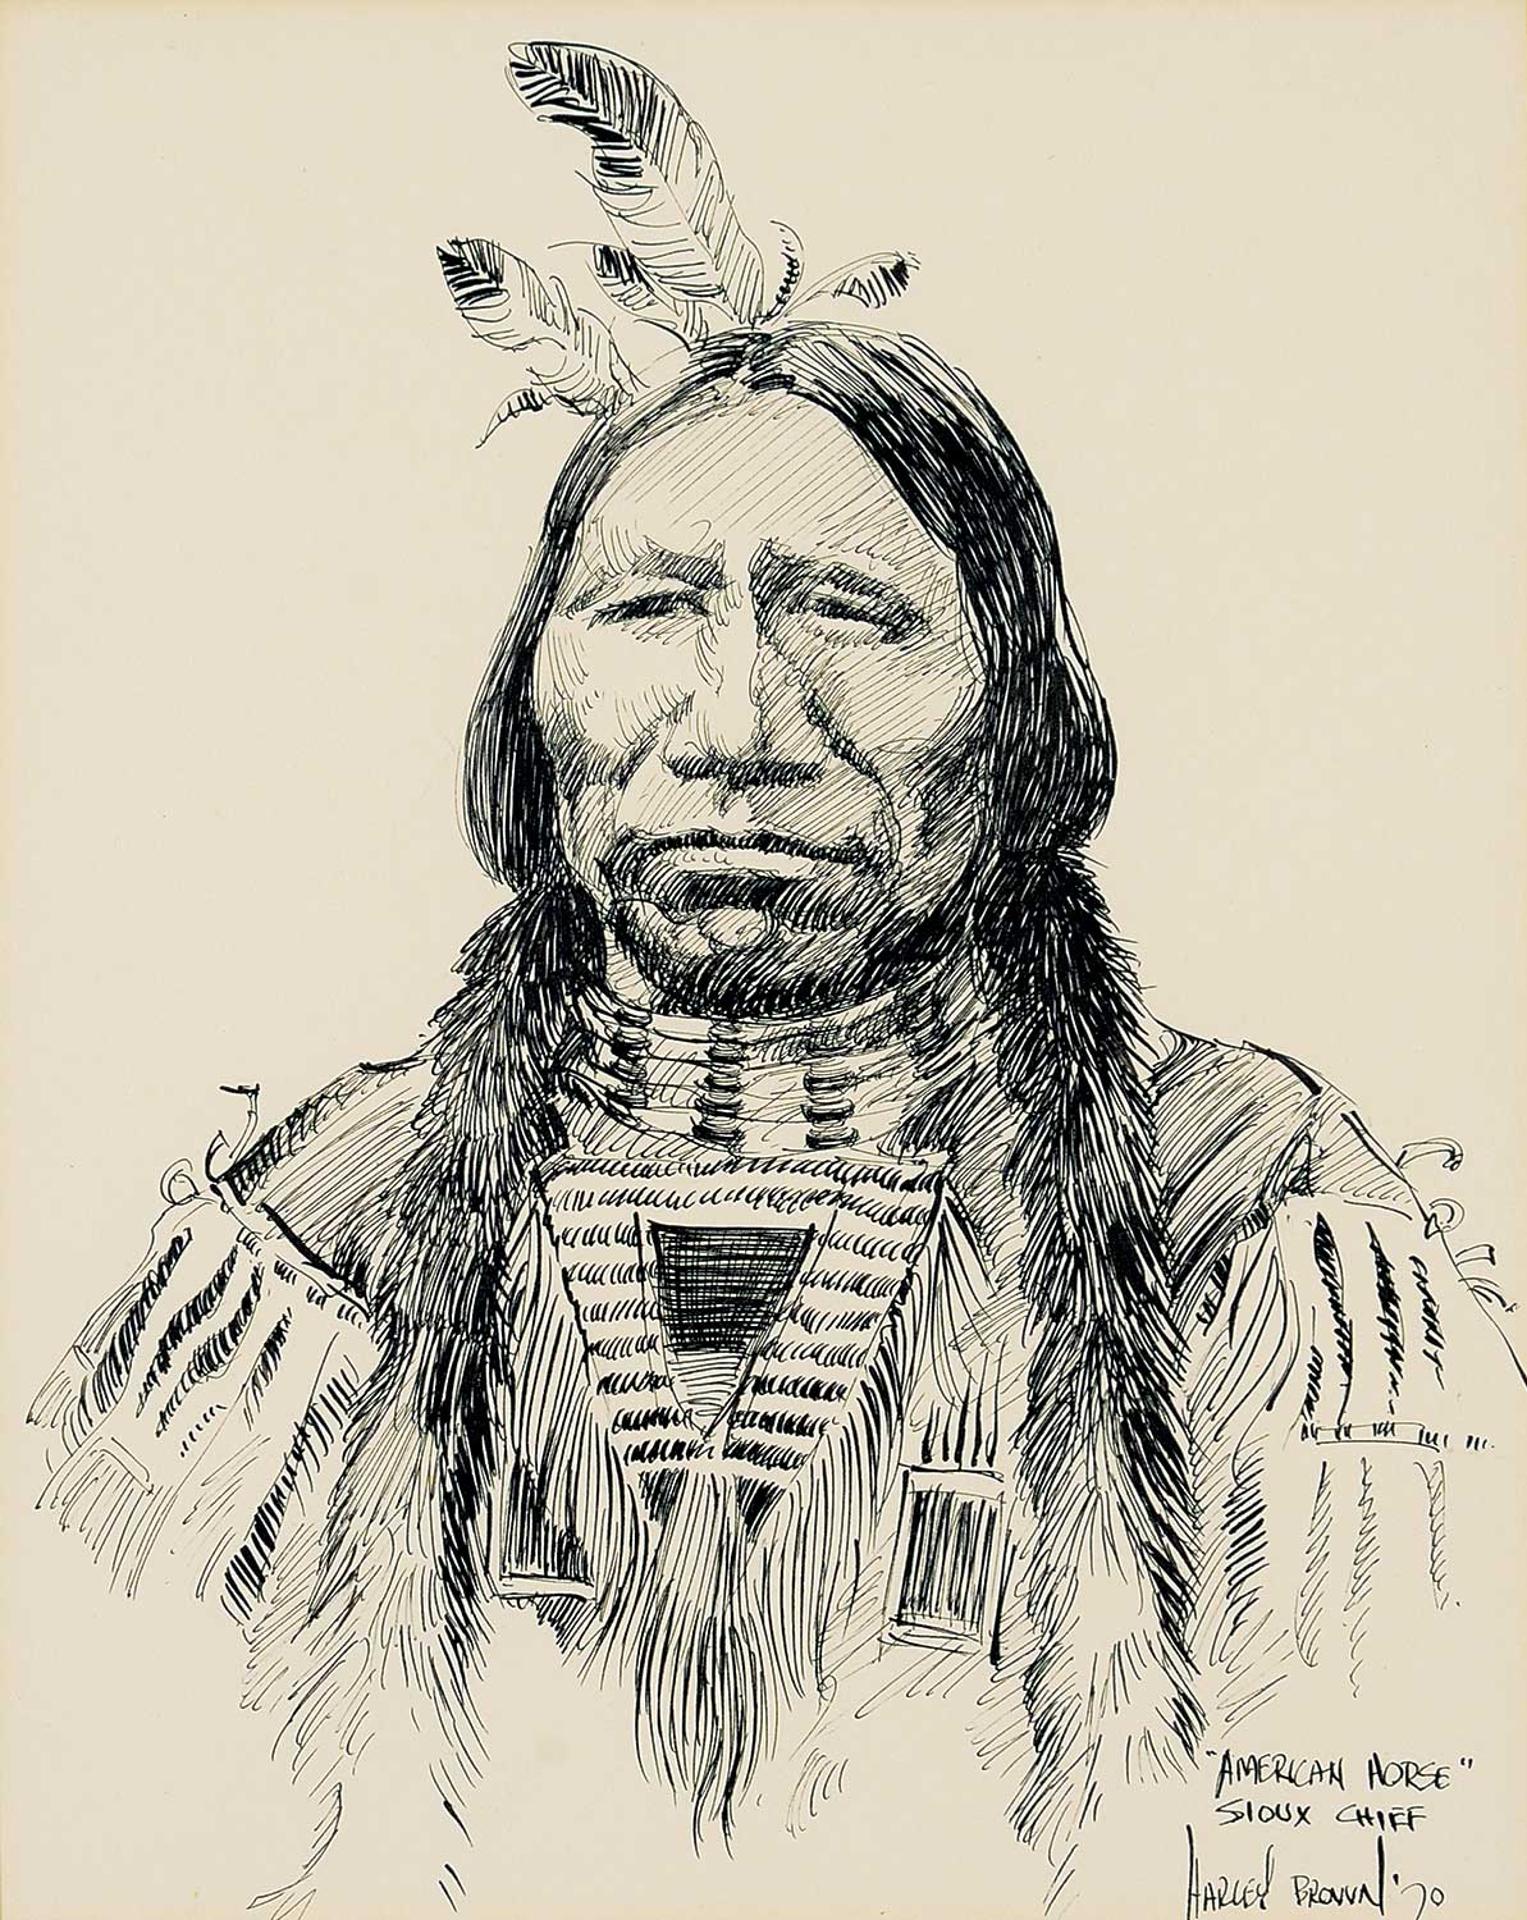 Harley W. Brown (1939) - American Horse - Sioux Chief